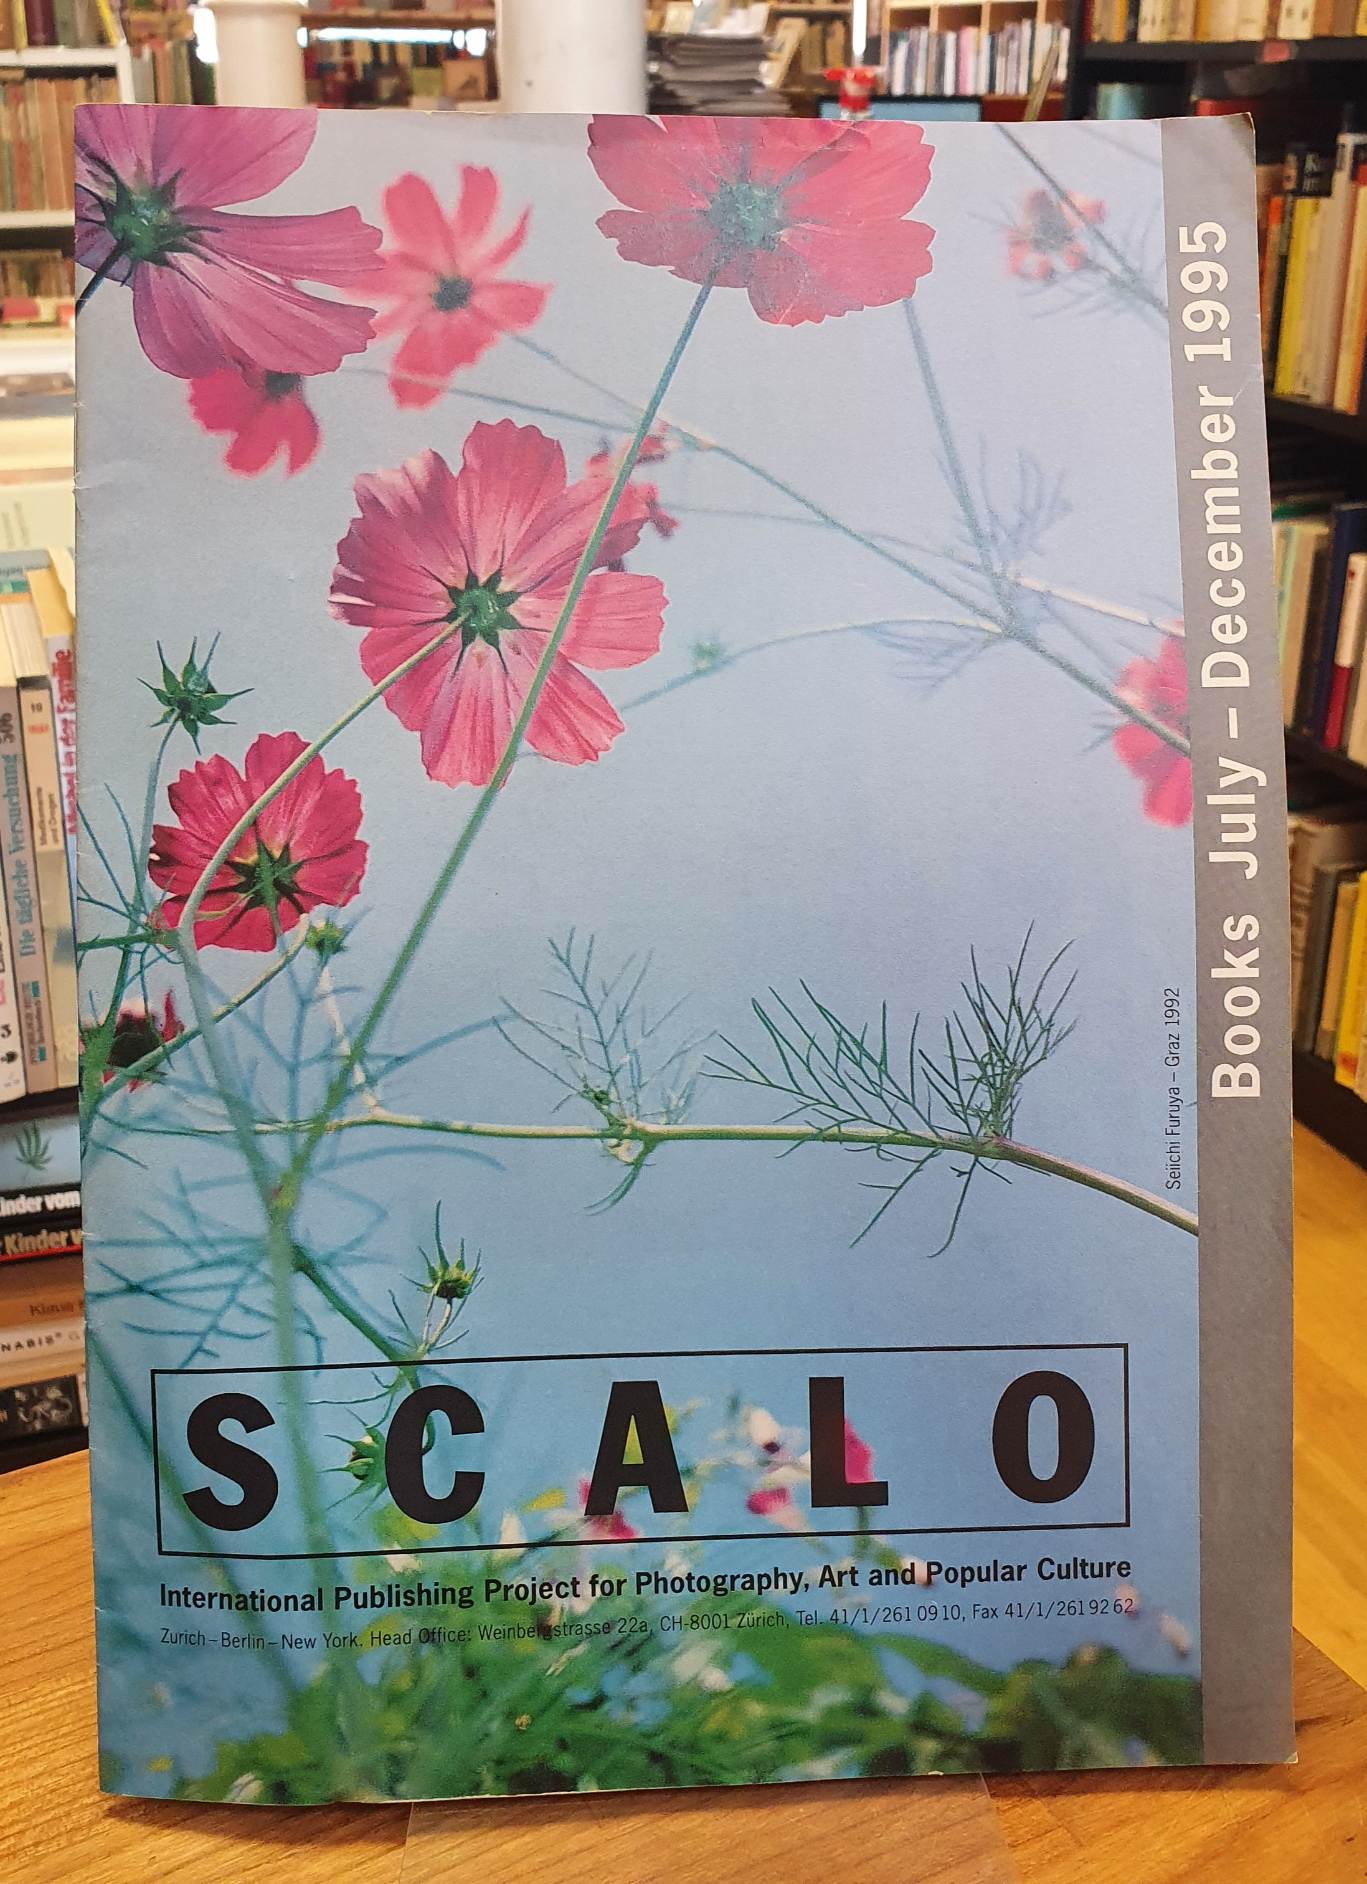 Scalo, Scalo – International Publishing Project for Photography, Art and Poular